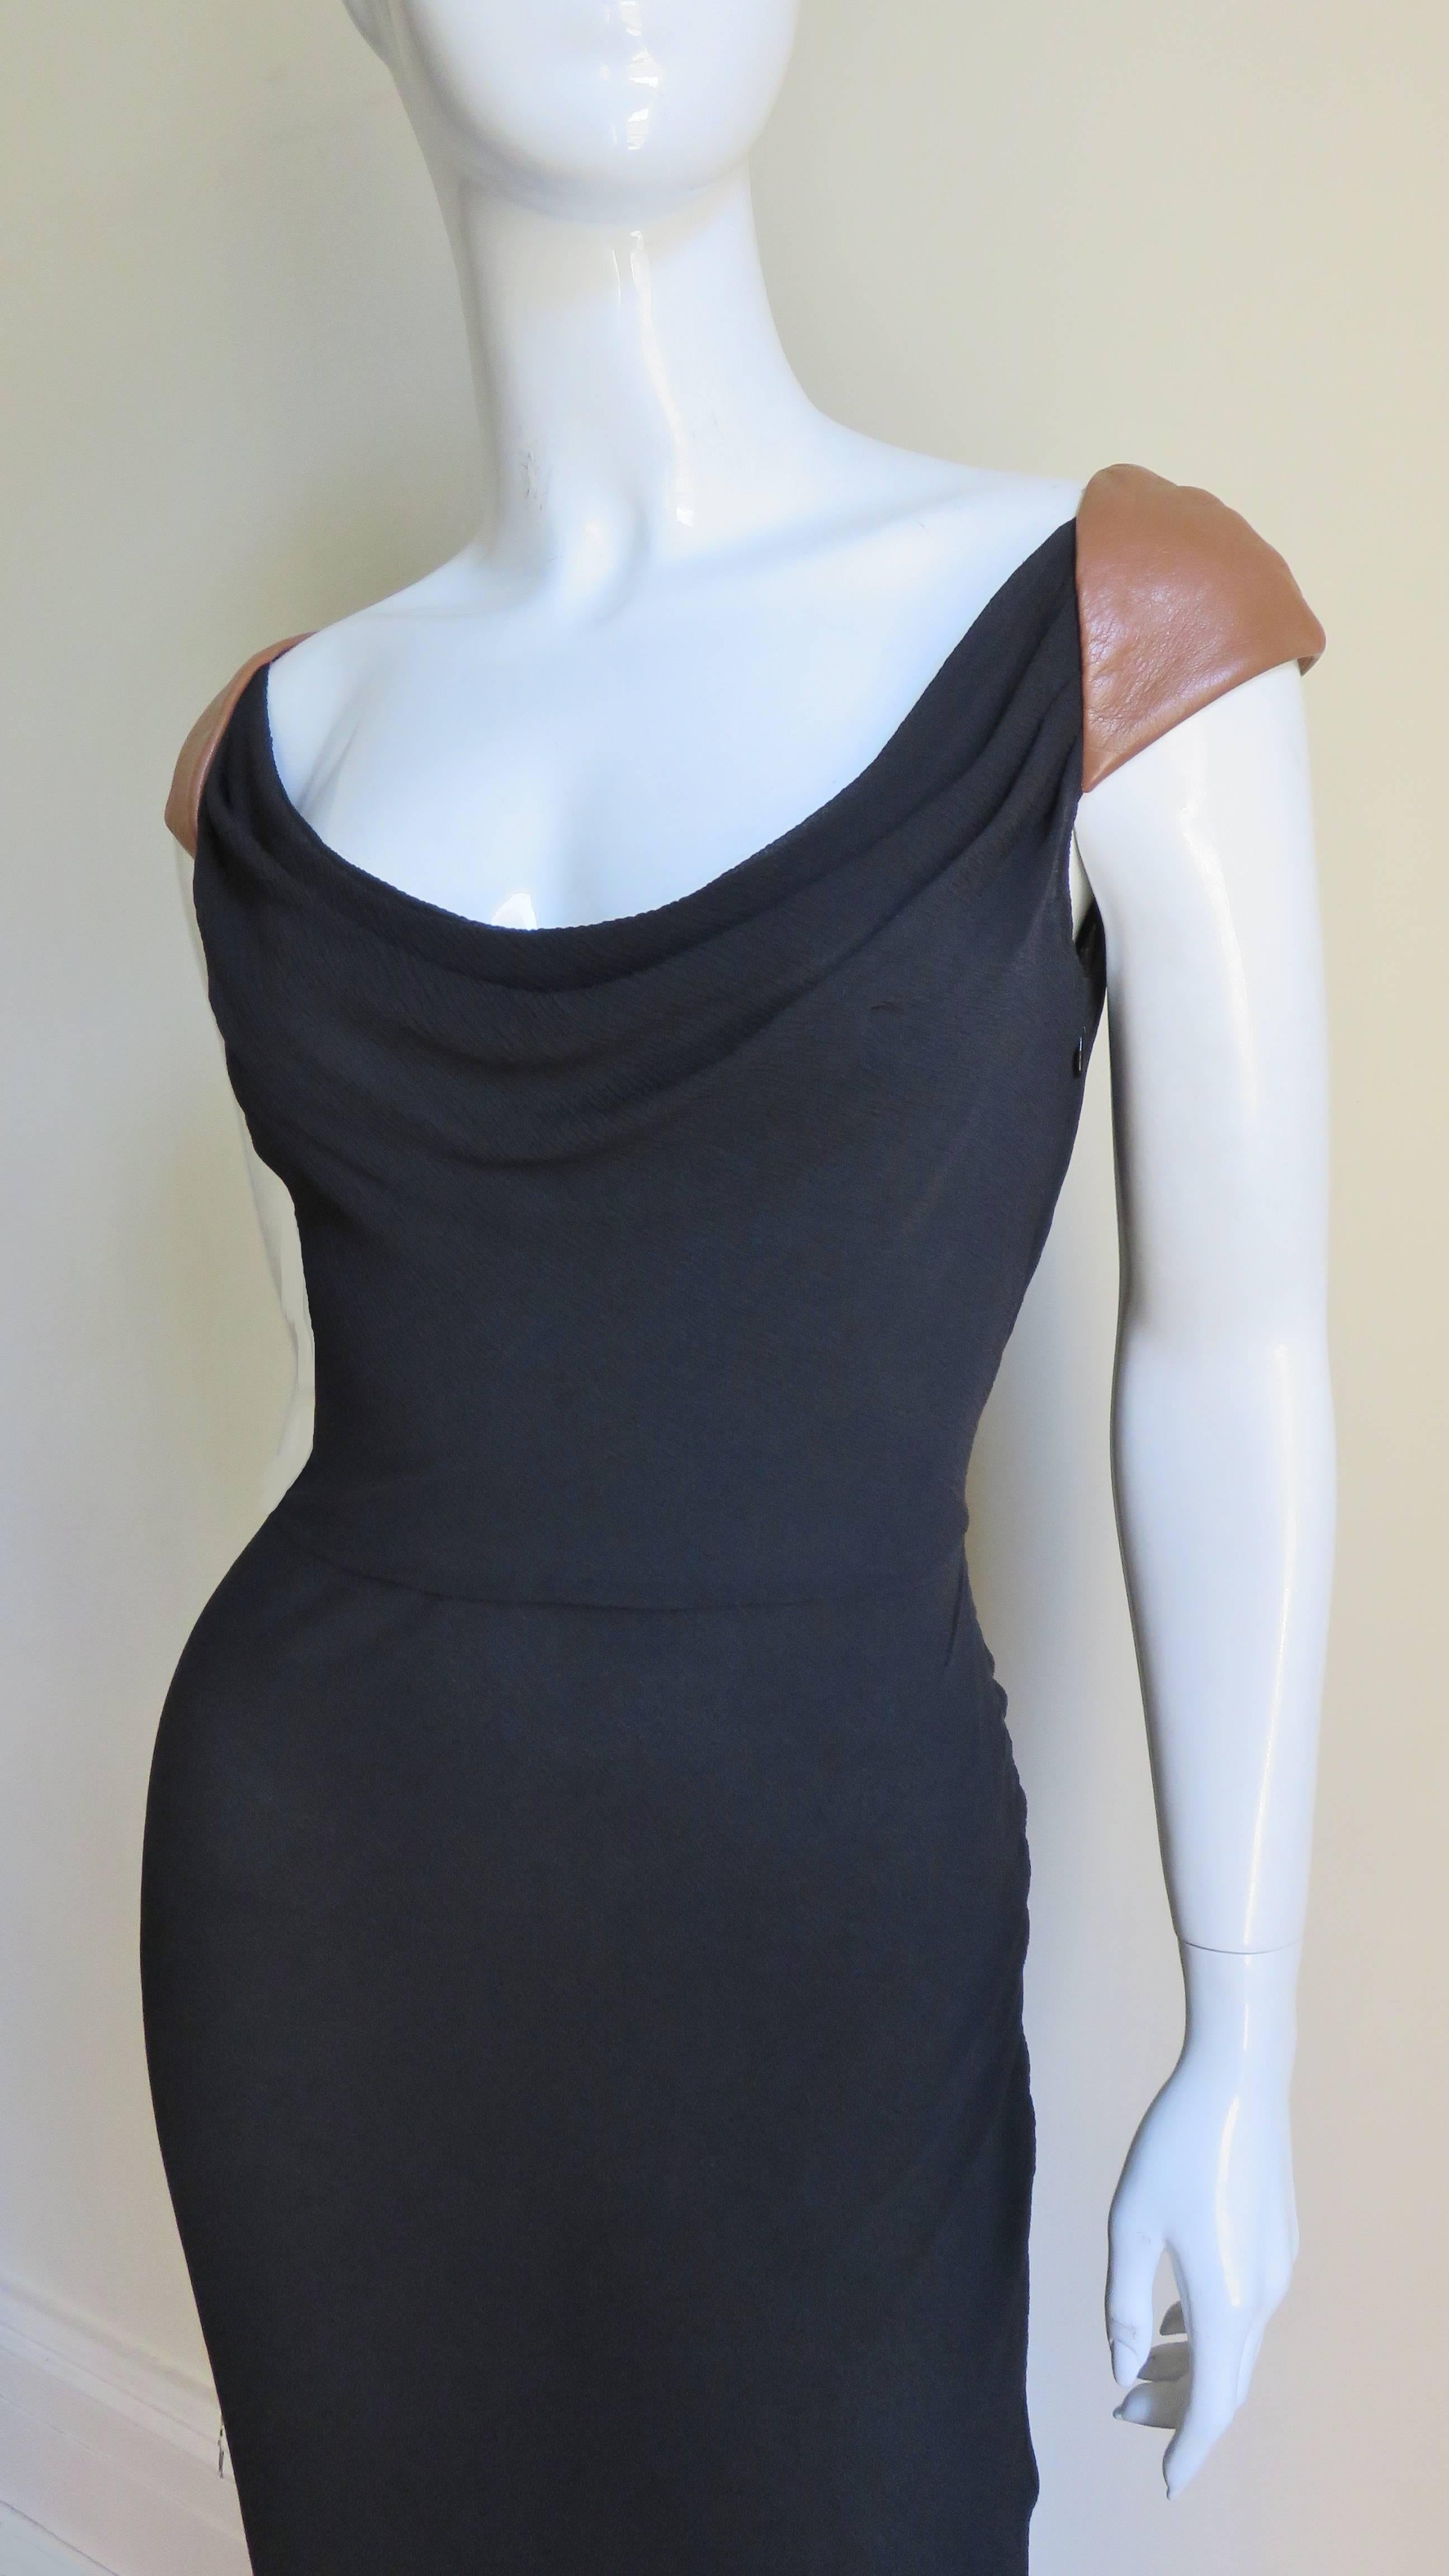 Gianni Versace Backless Silk Dress with Leather Trim In Excellent Condition For Sale In Water Mill, NY